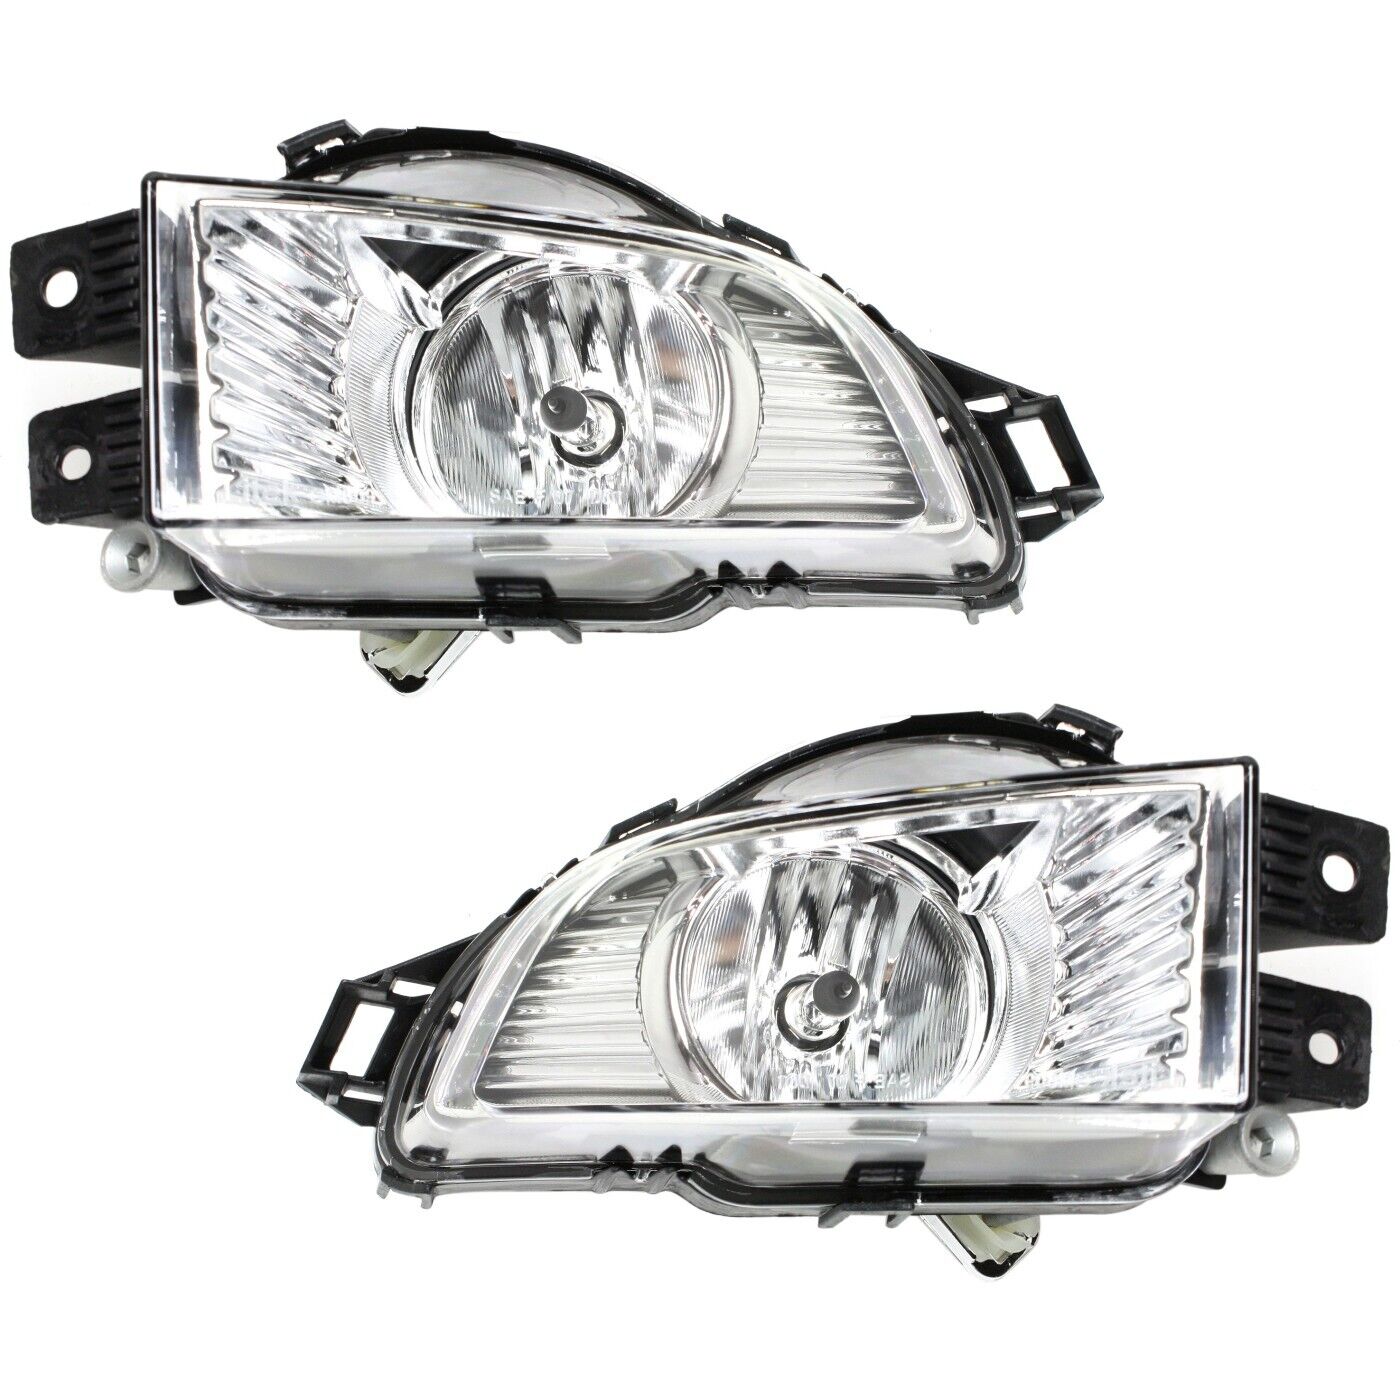 Fog Light Set For 2011-2013 Buick Regal Driver and Passenger Side With Bulbs